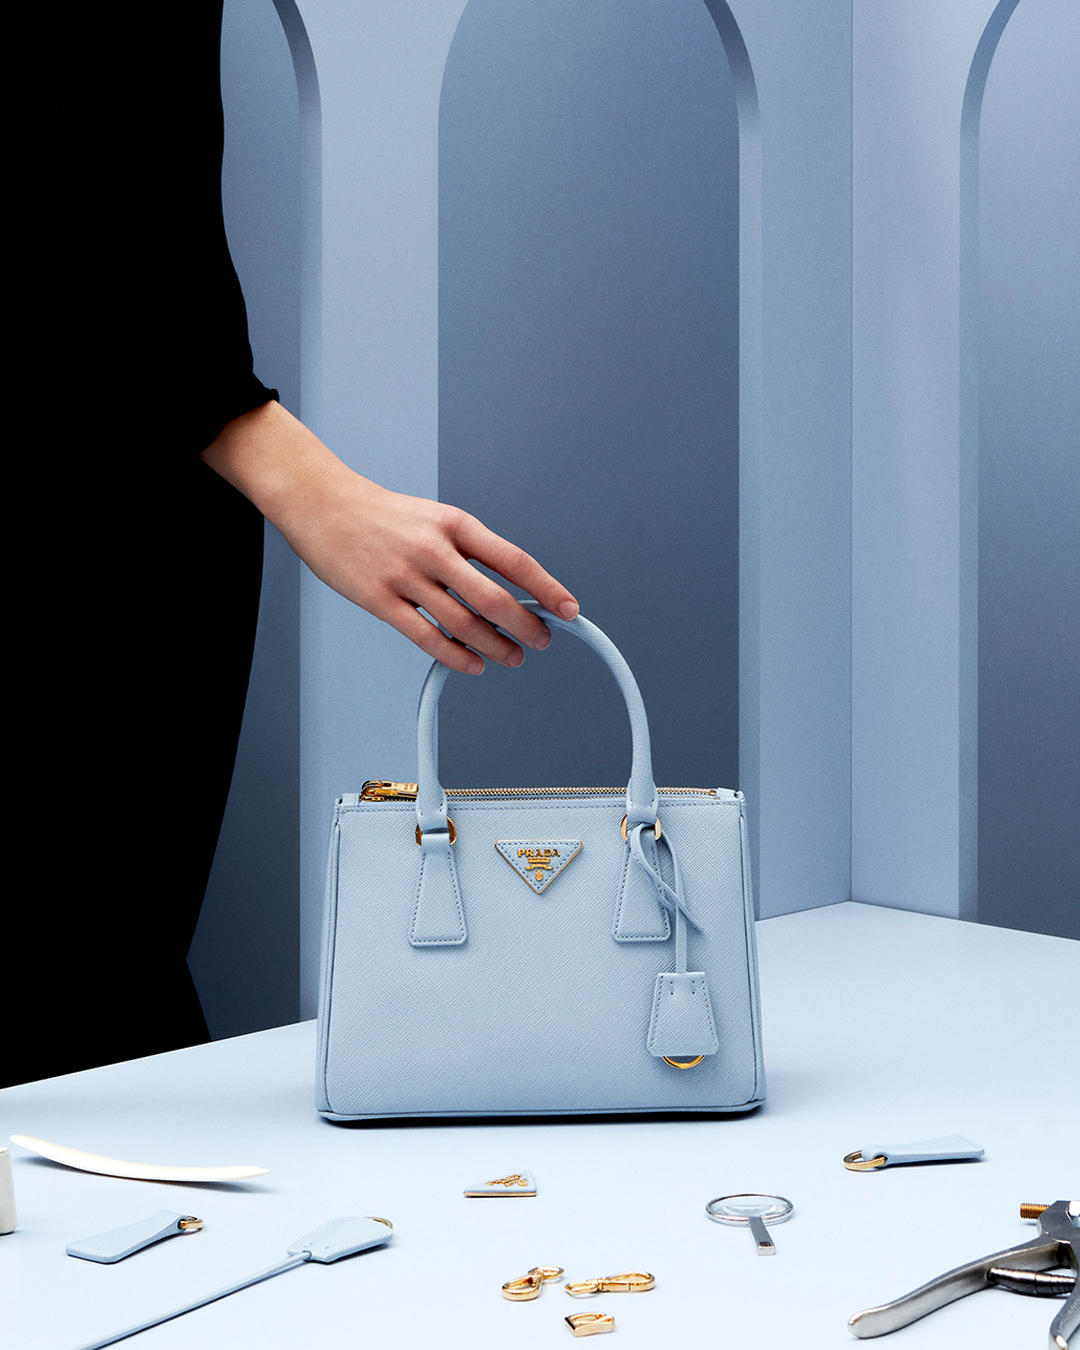 Prada - An heirloom in the making, the Galleria bag is named after the home of Prada’s historic flag